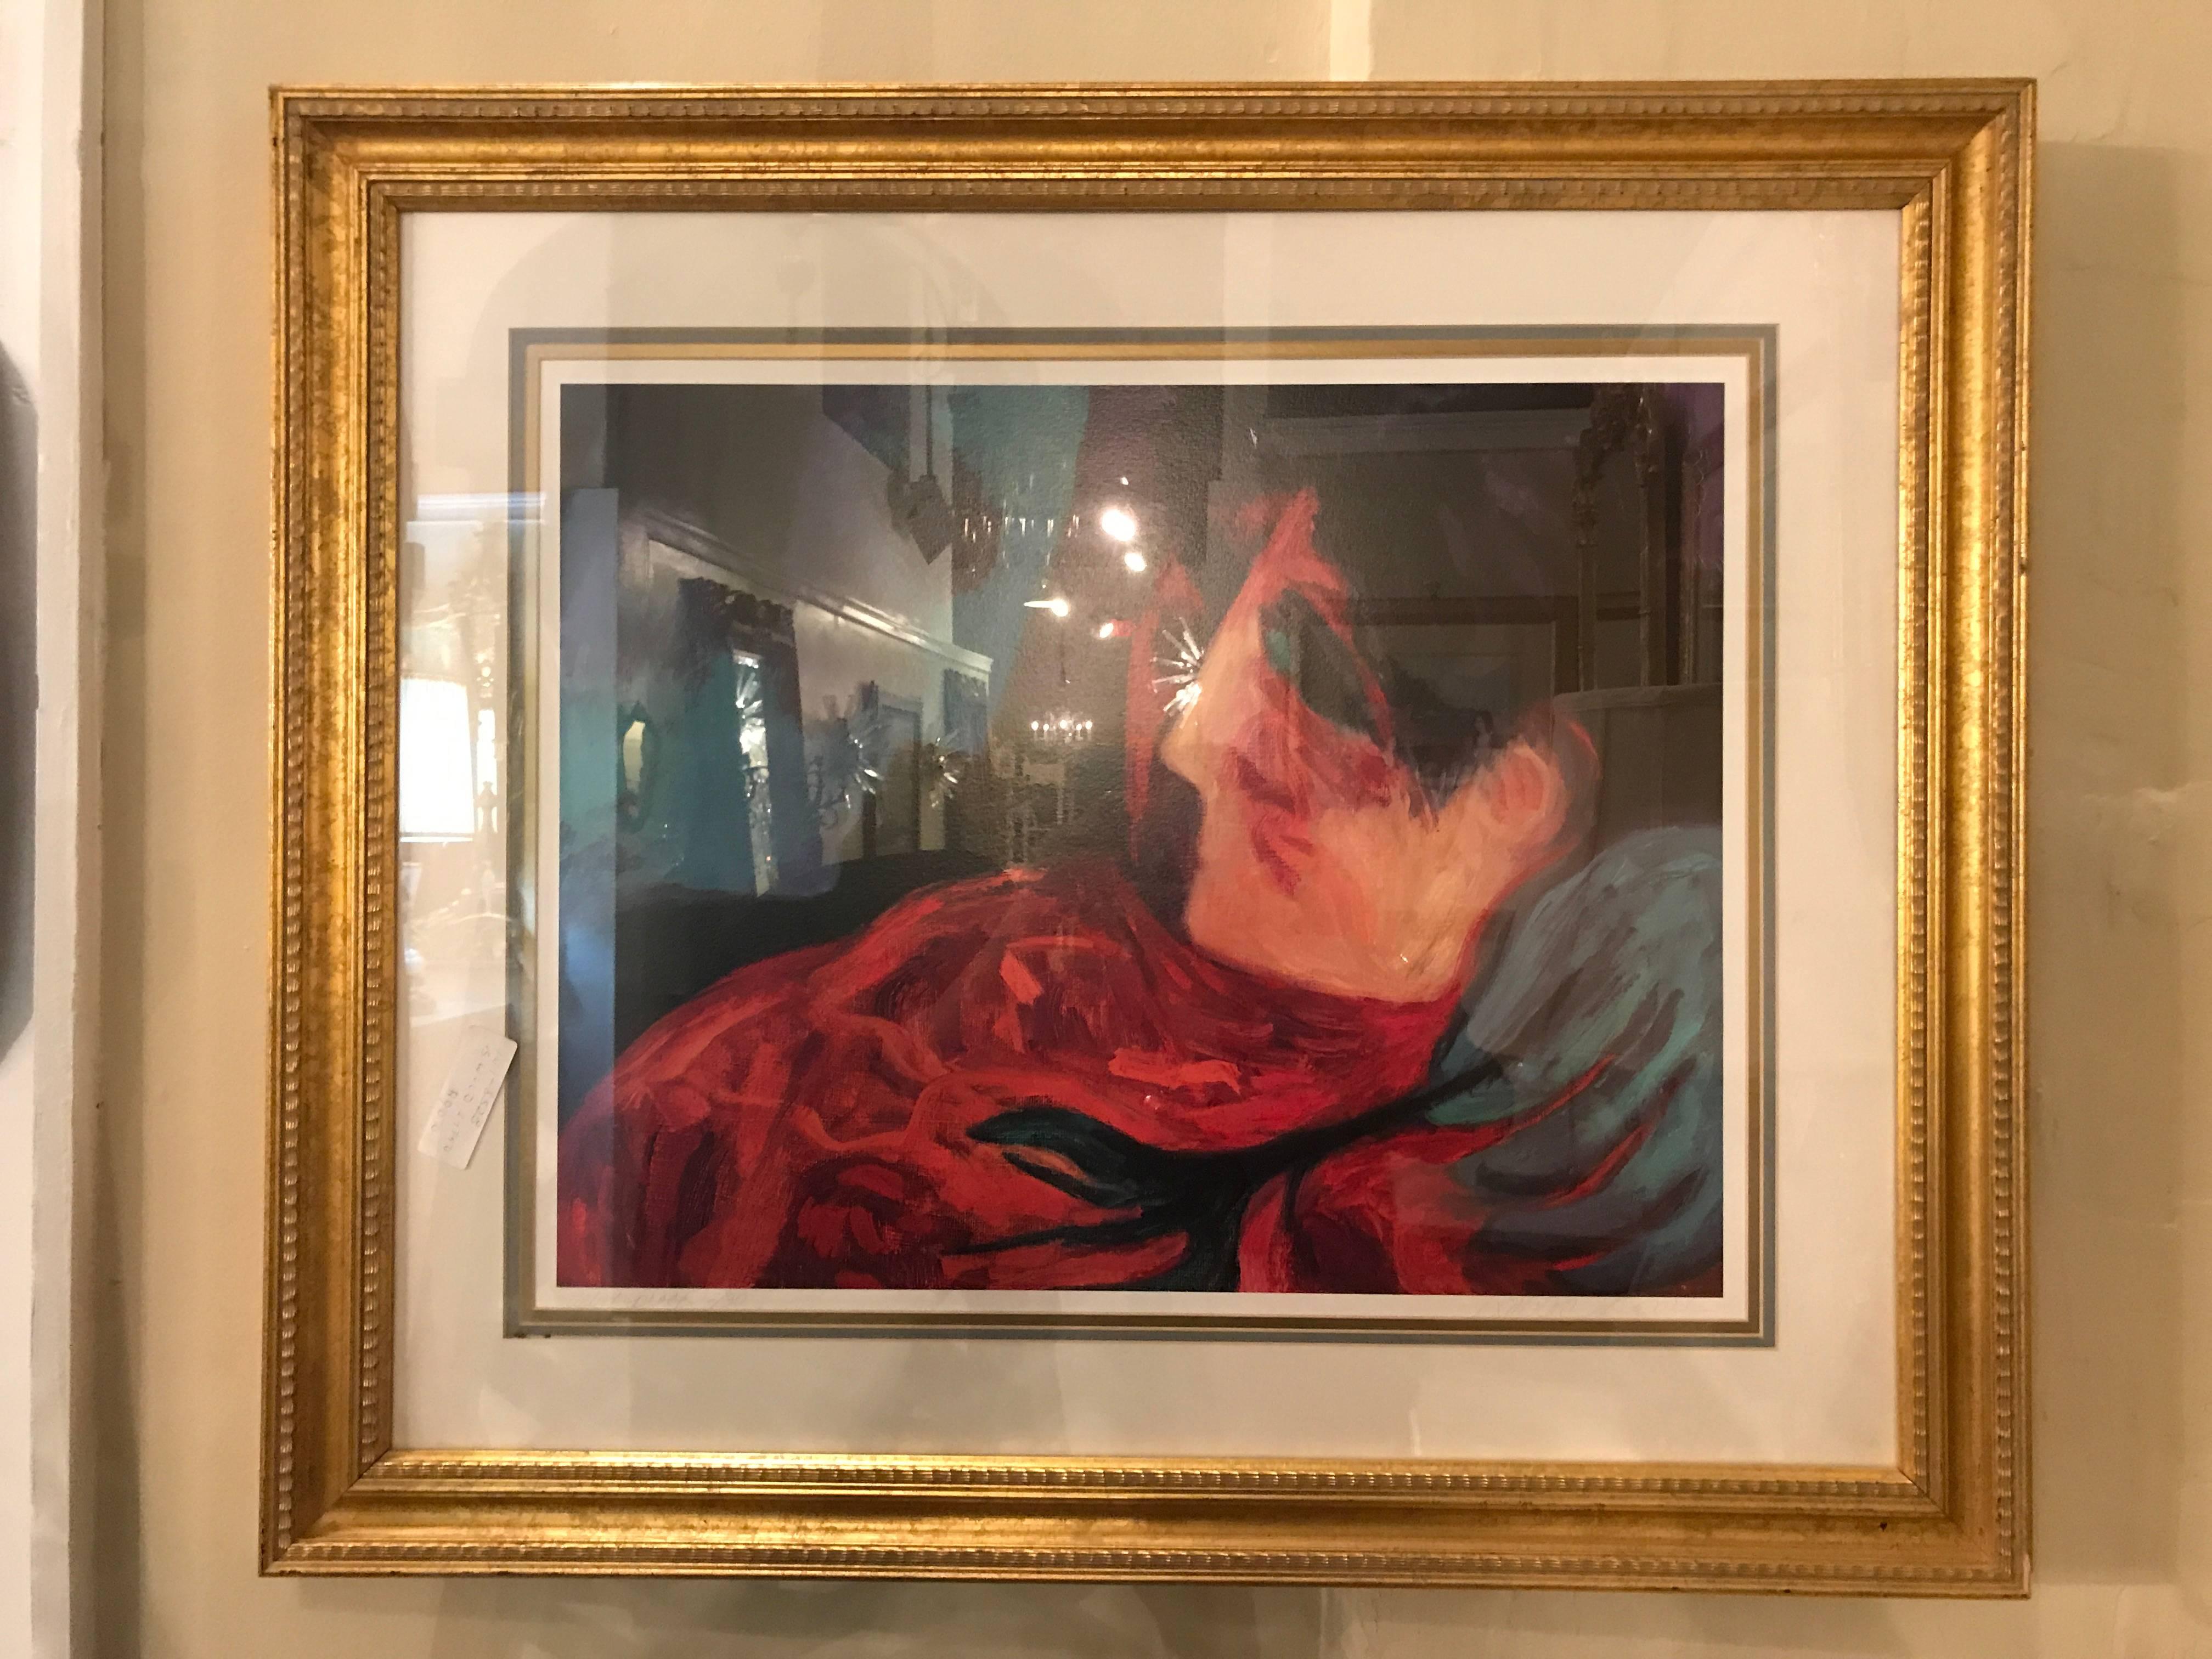 Barbara Wood desert flower framed lithograph. Signed numbered and matted in a gilt gold frame.

Barbara A. Wood is an artist who communicates with the viewer. Fascinated by color, her canvases display an extremely individualistic, figurative